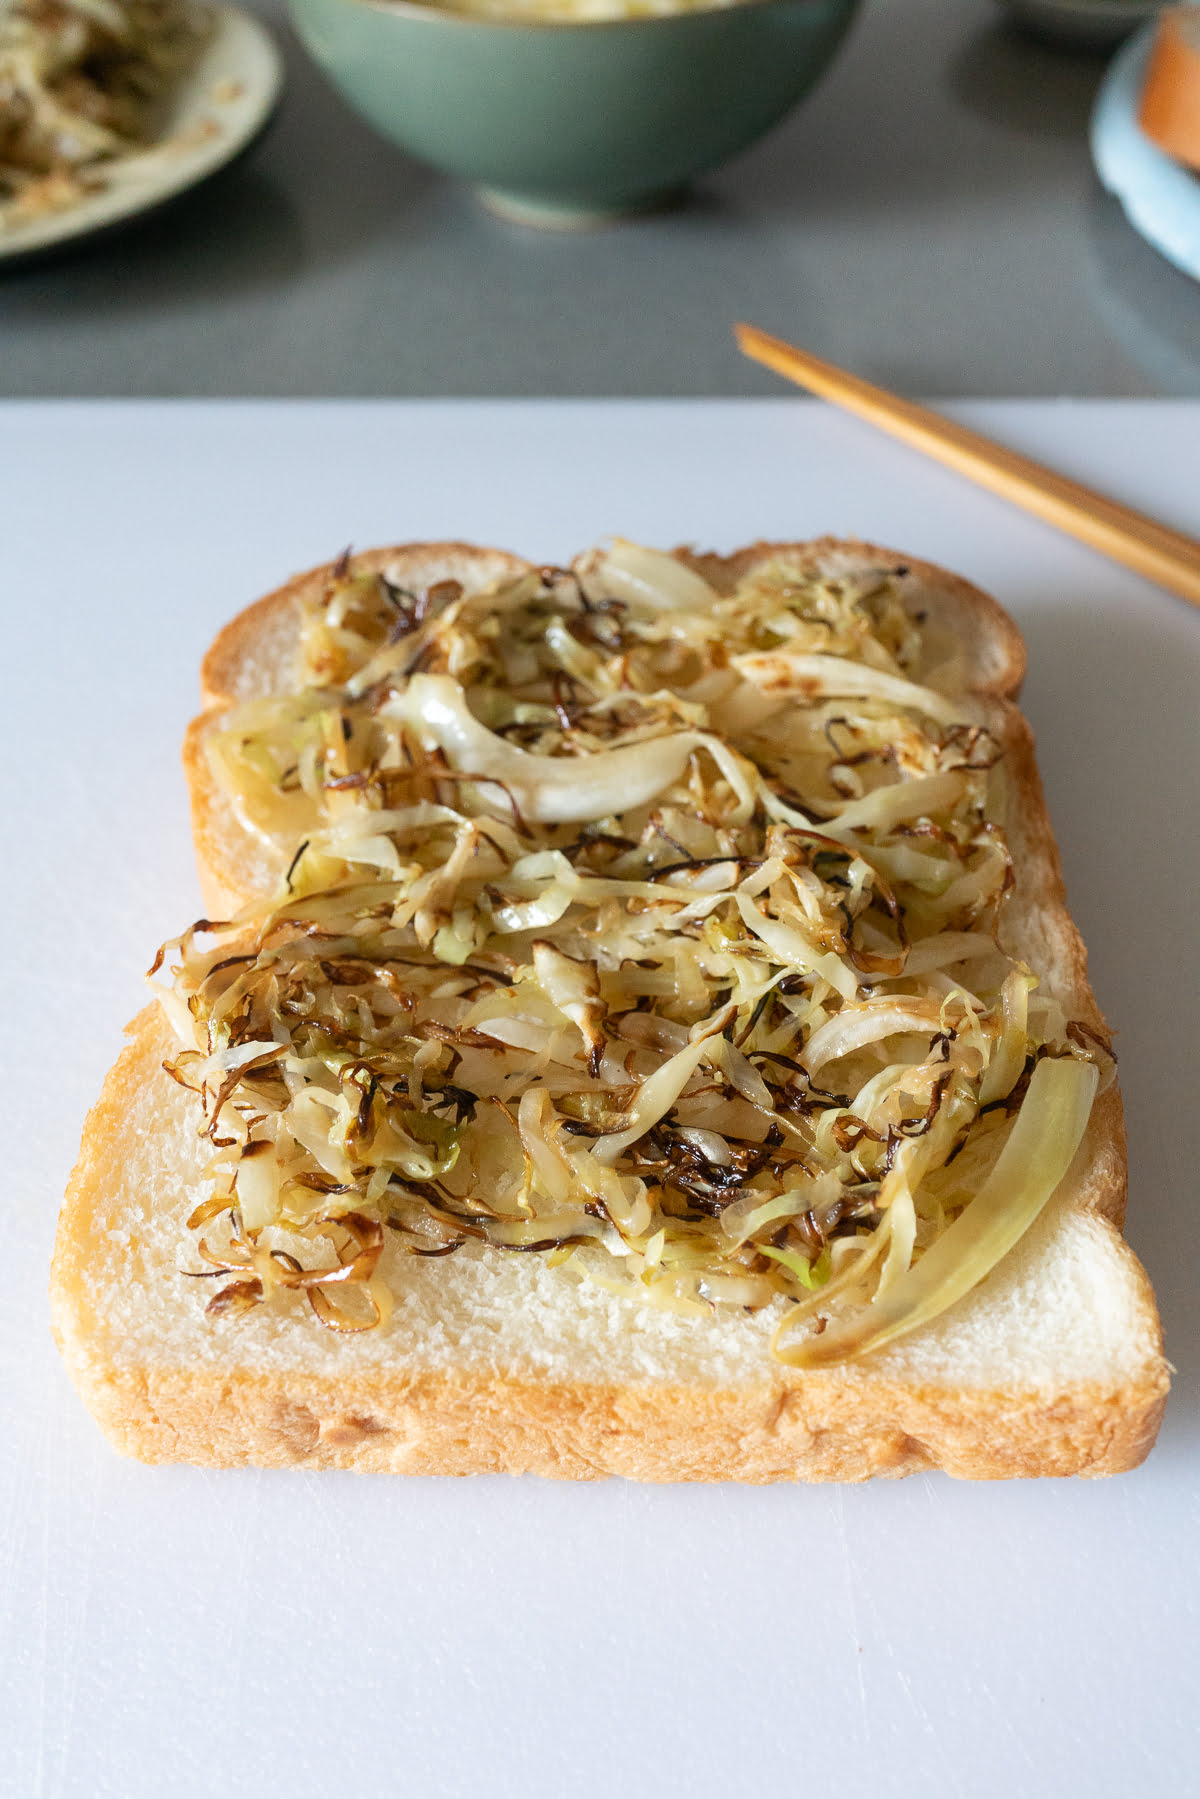 Putting the cabbage on the slice of bread.